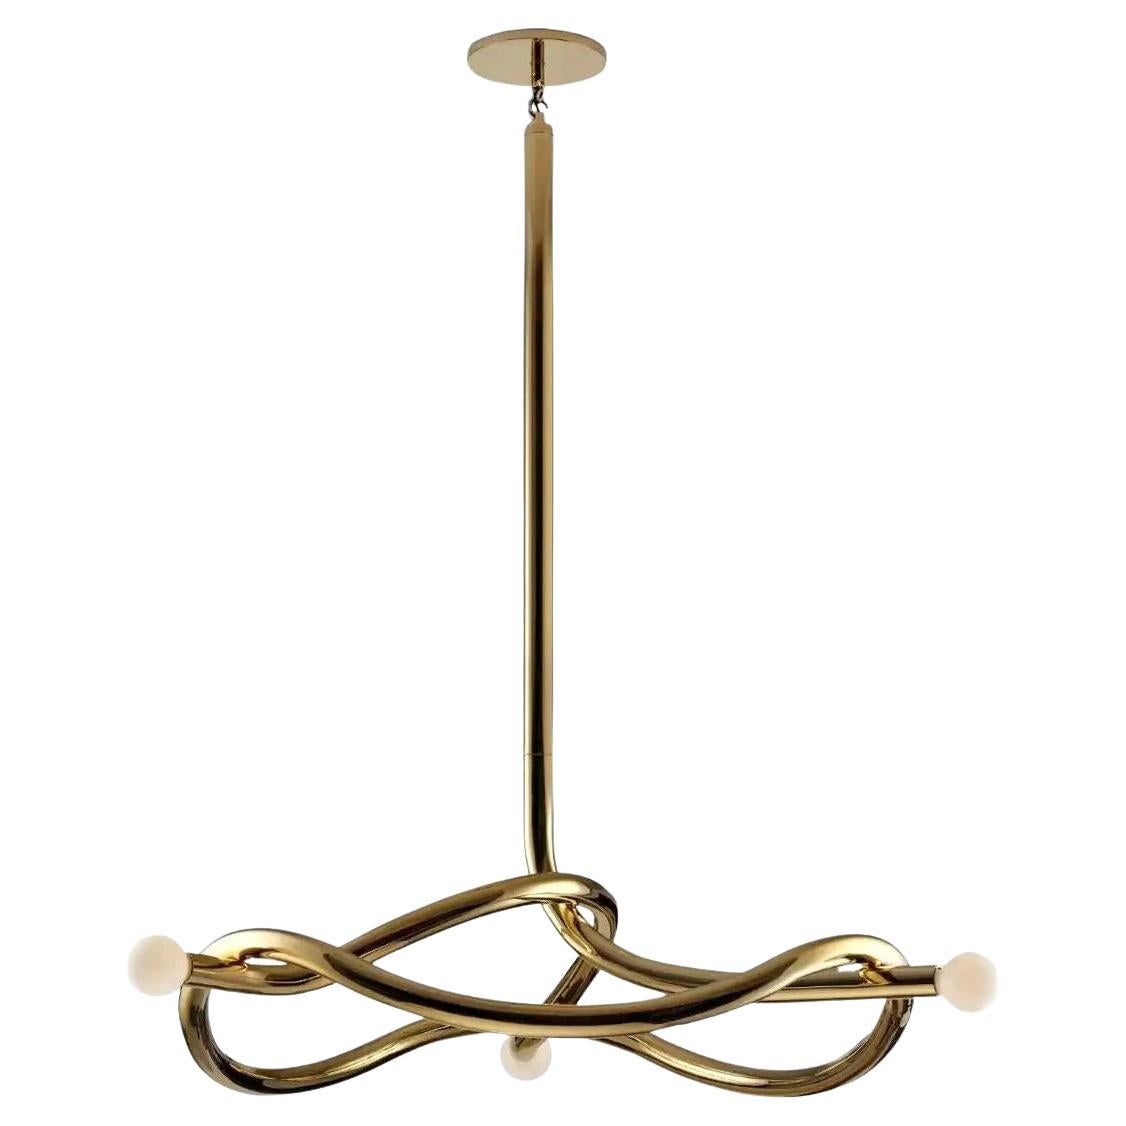 Contemporary Burnt Brass Chandelier, Tryst Three by Paul Matter

Tryst chandelier explores the relationship between interlocked forms in perfect union and balance. A study of form and function that evokes the grace and strength of the contributor